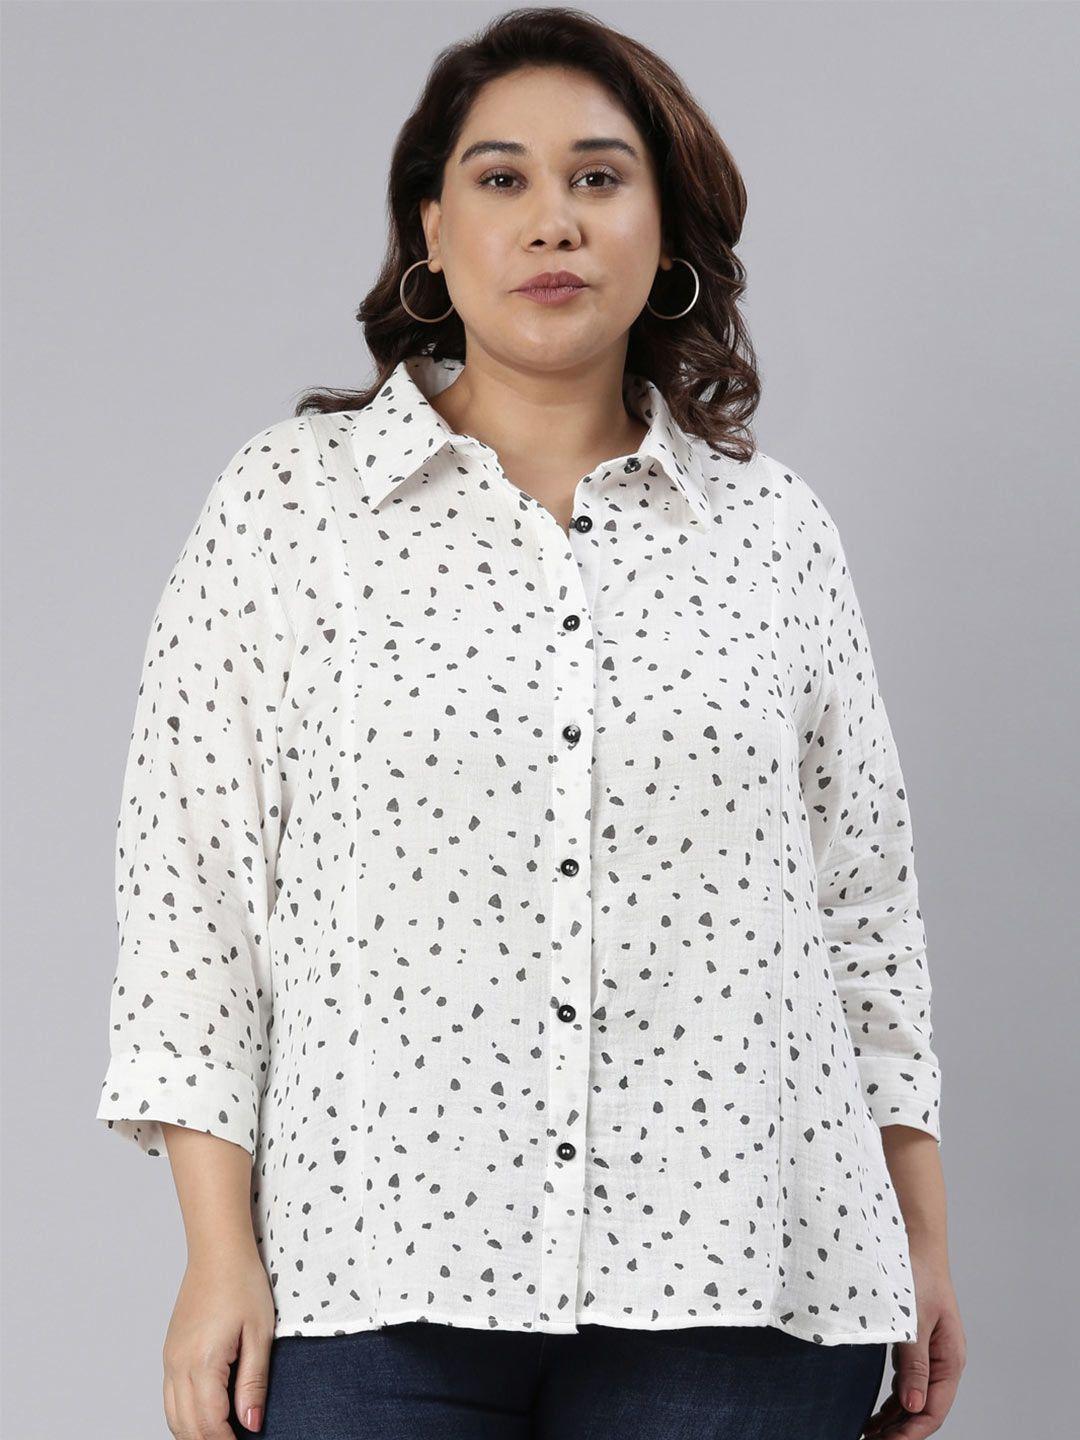 the-pink-moon-women-plus-size-printed-casual-cotton-shirt